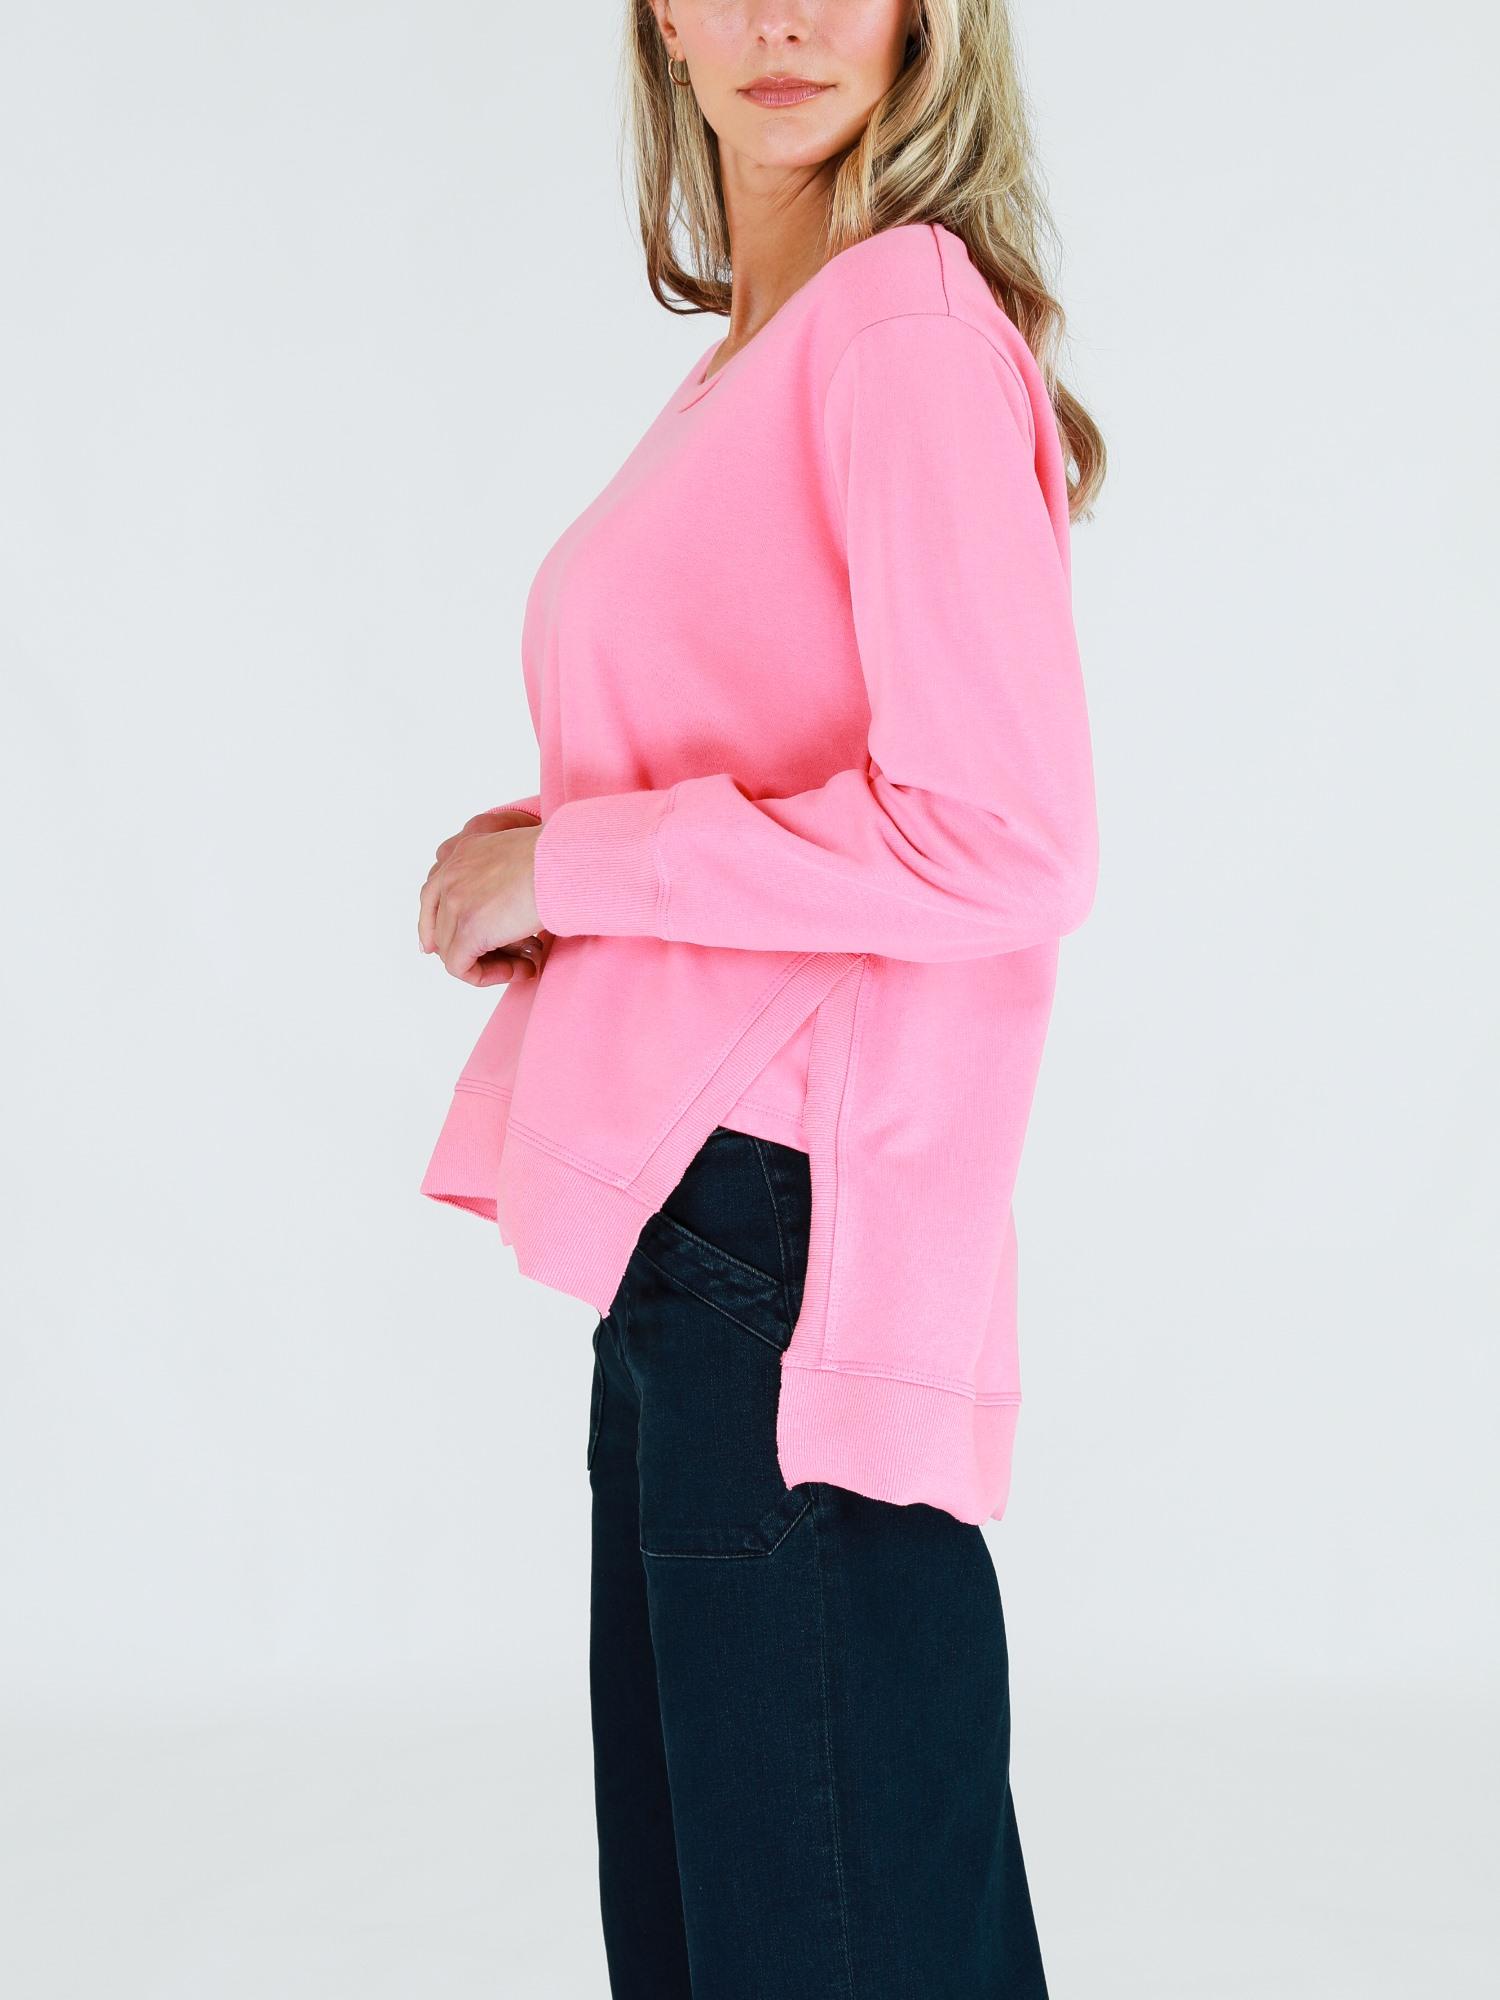 Hot Pink Sweater #color_peaches n cream